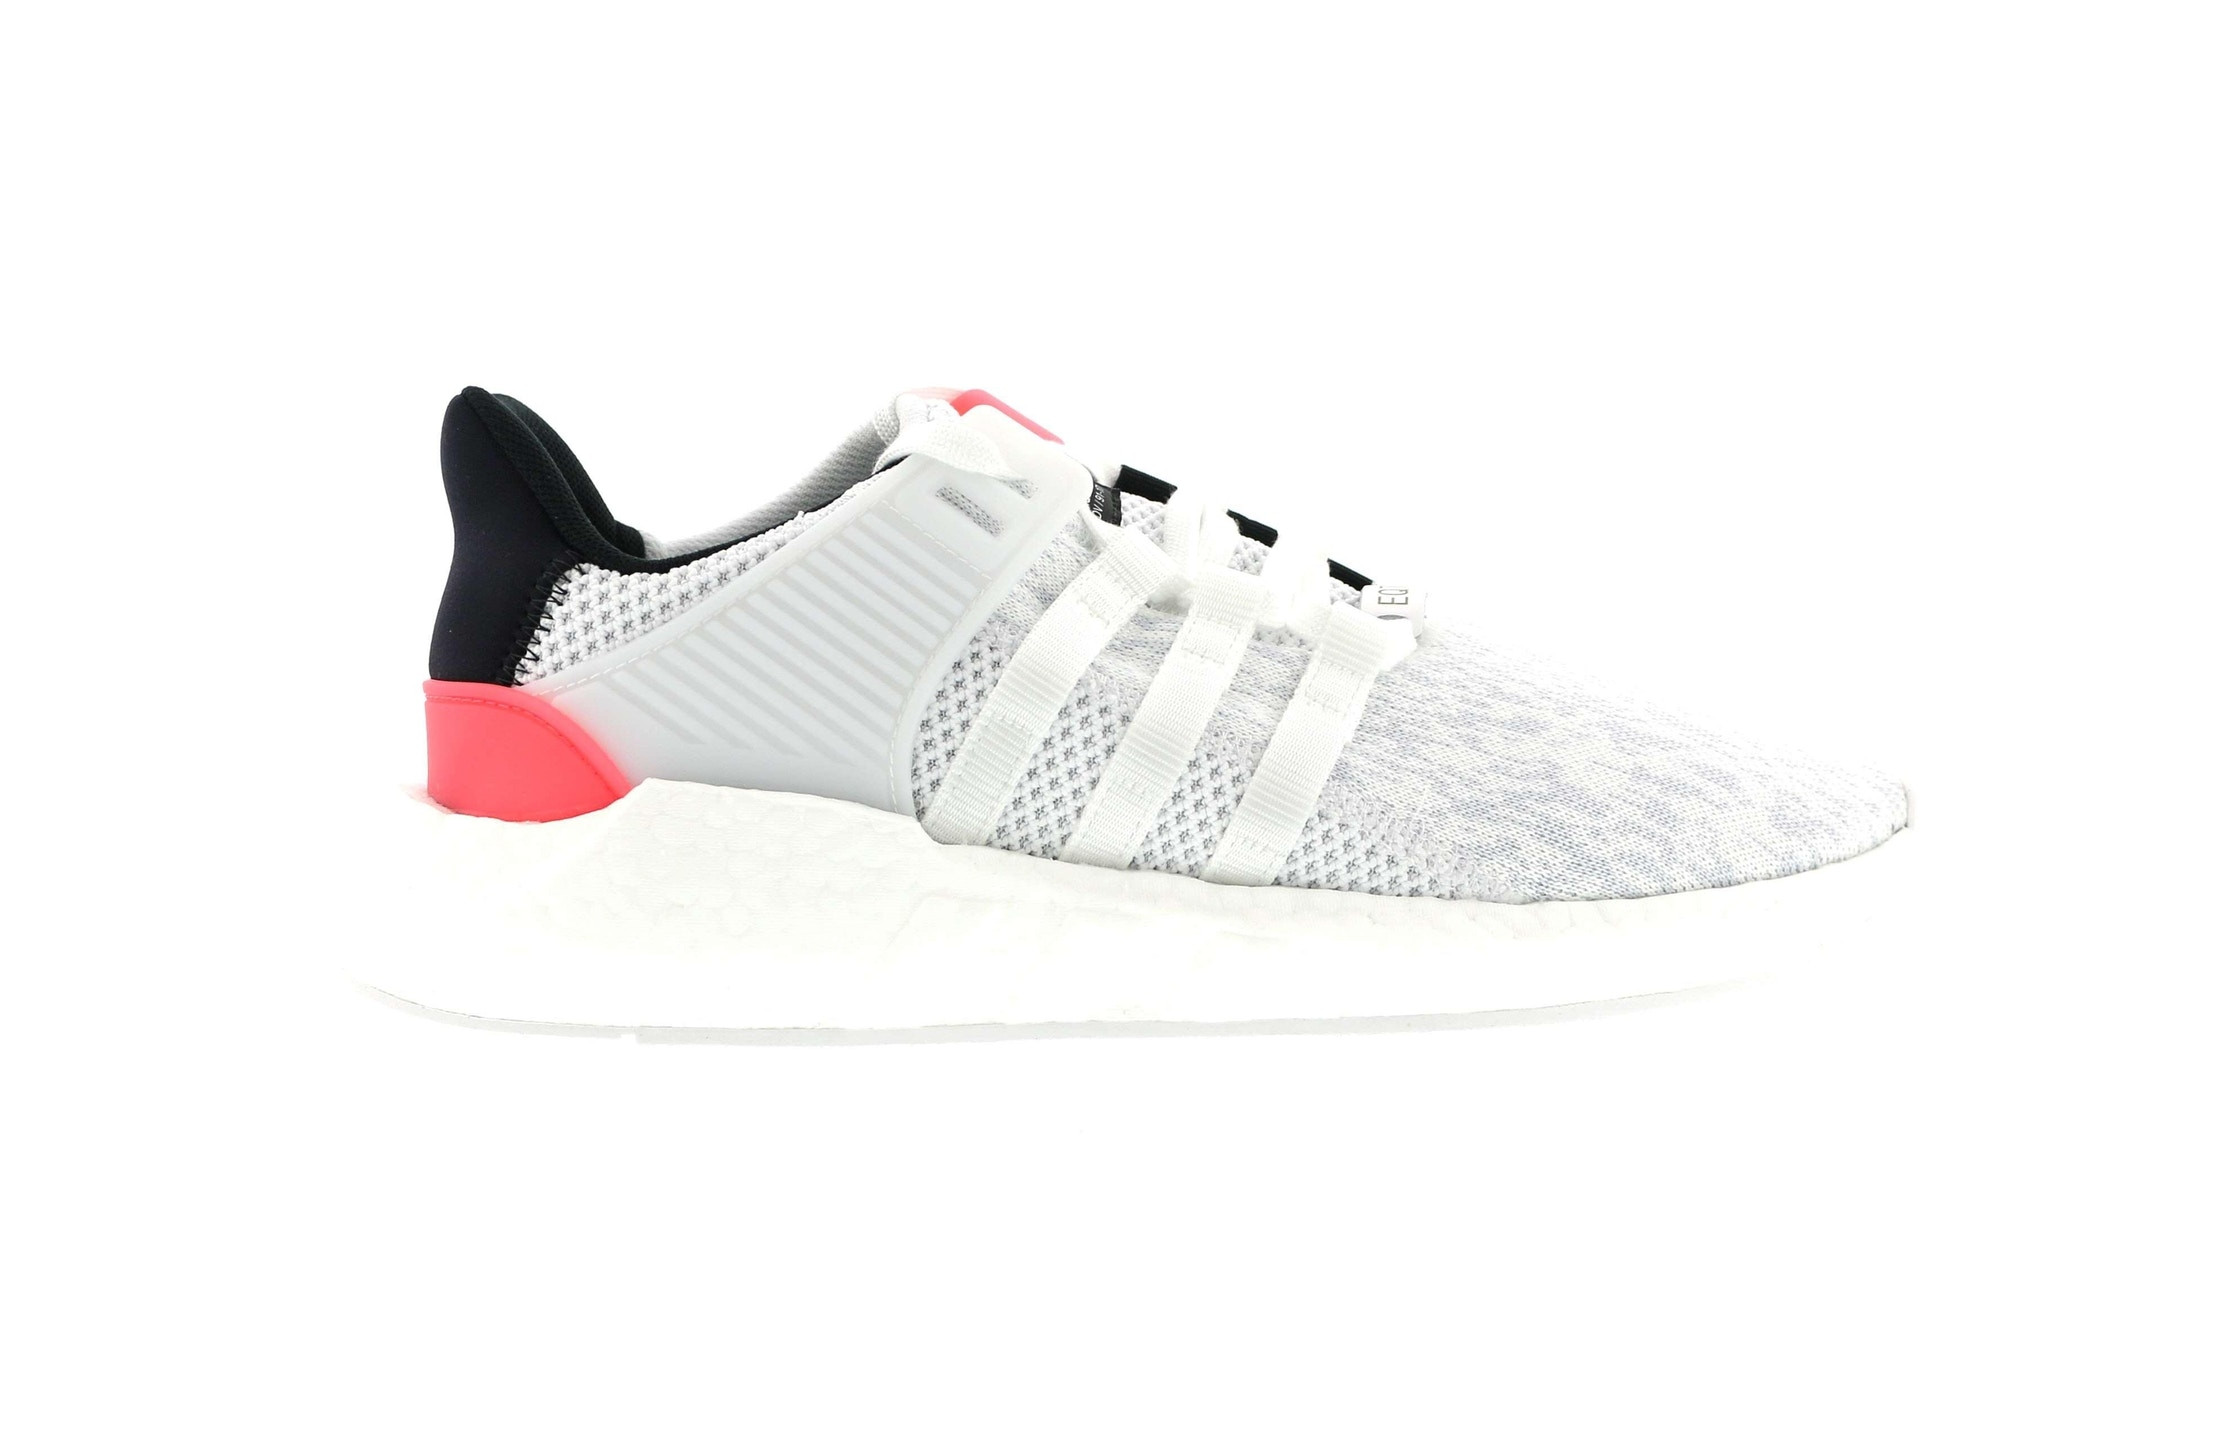  EQT Support 93/17 "White Red"